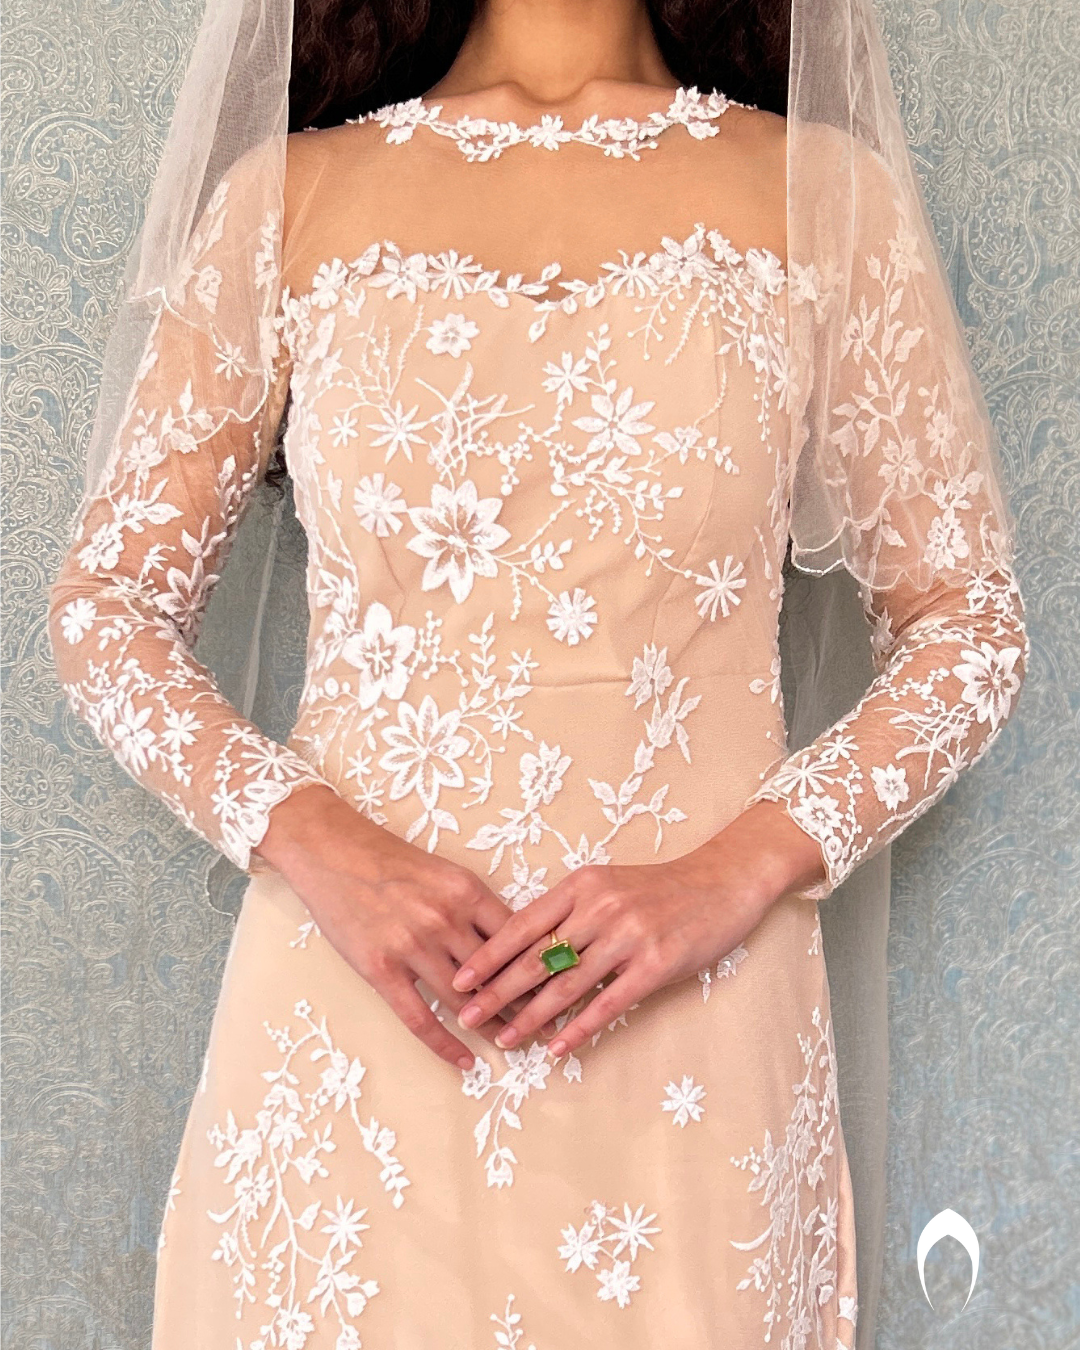 Signature bridal mermaid gown in champagne shade with floral lace embroidery